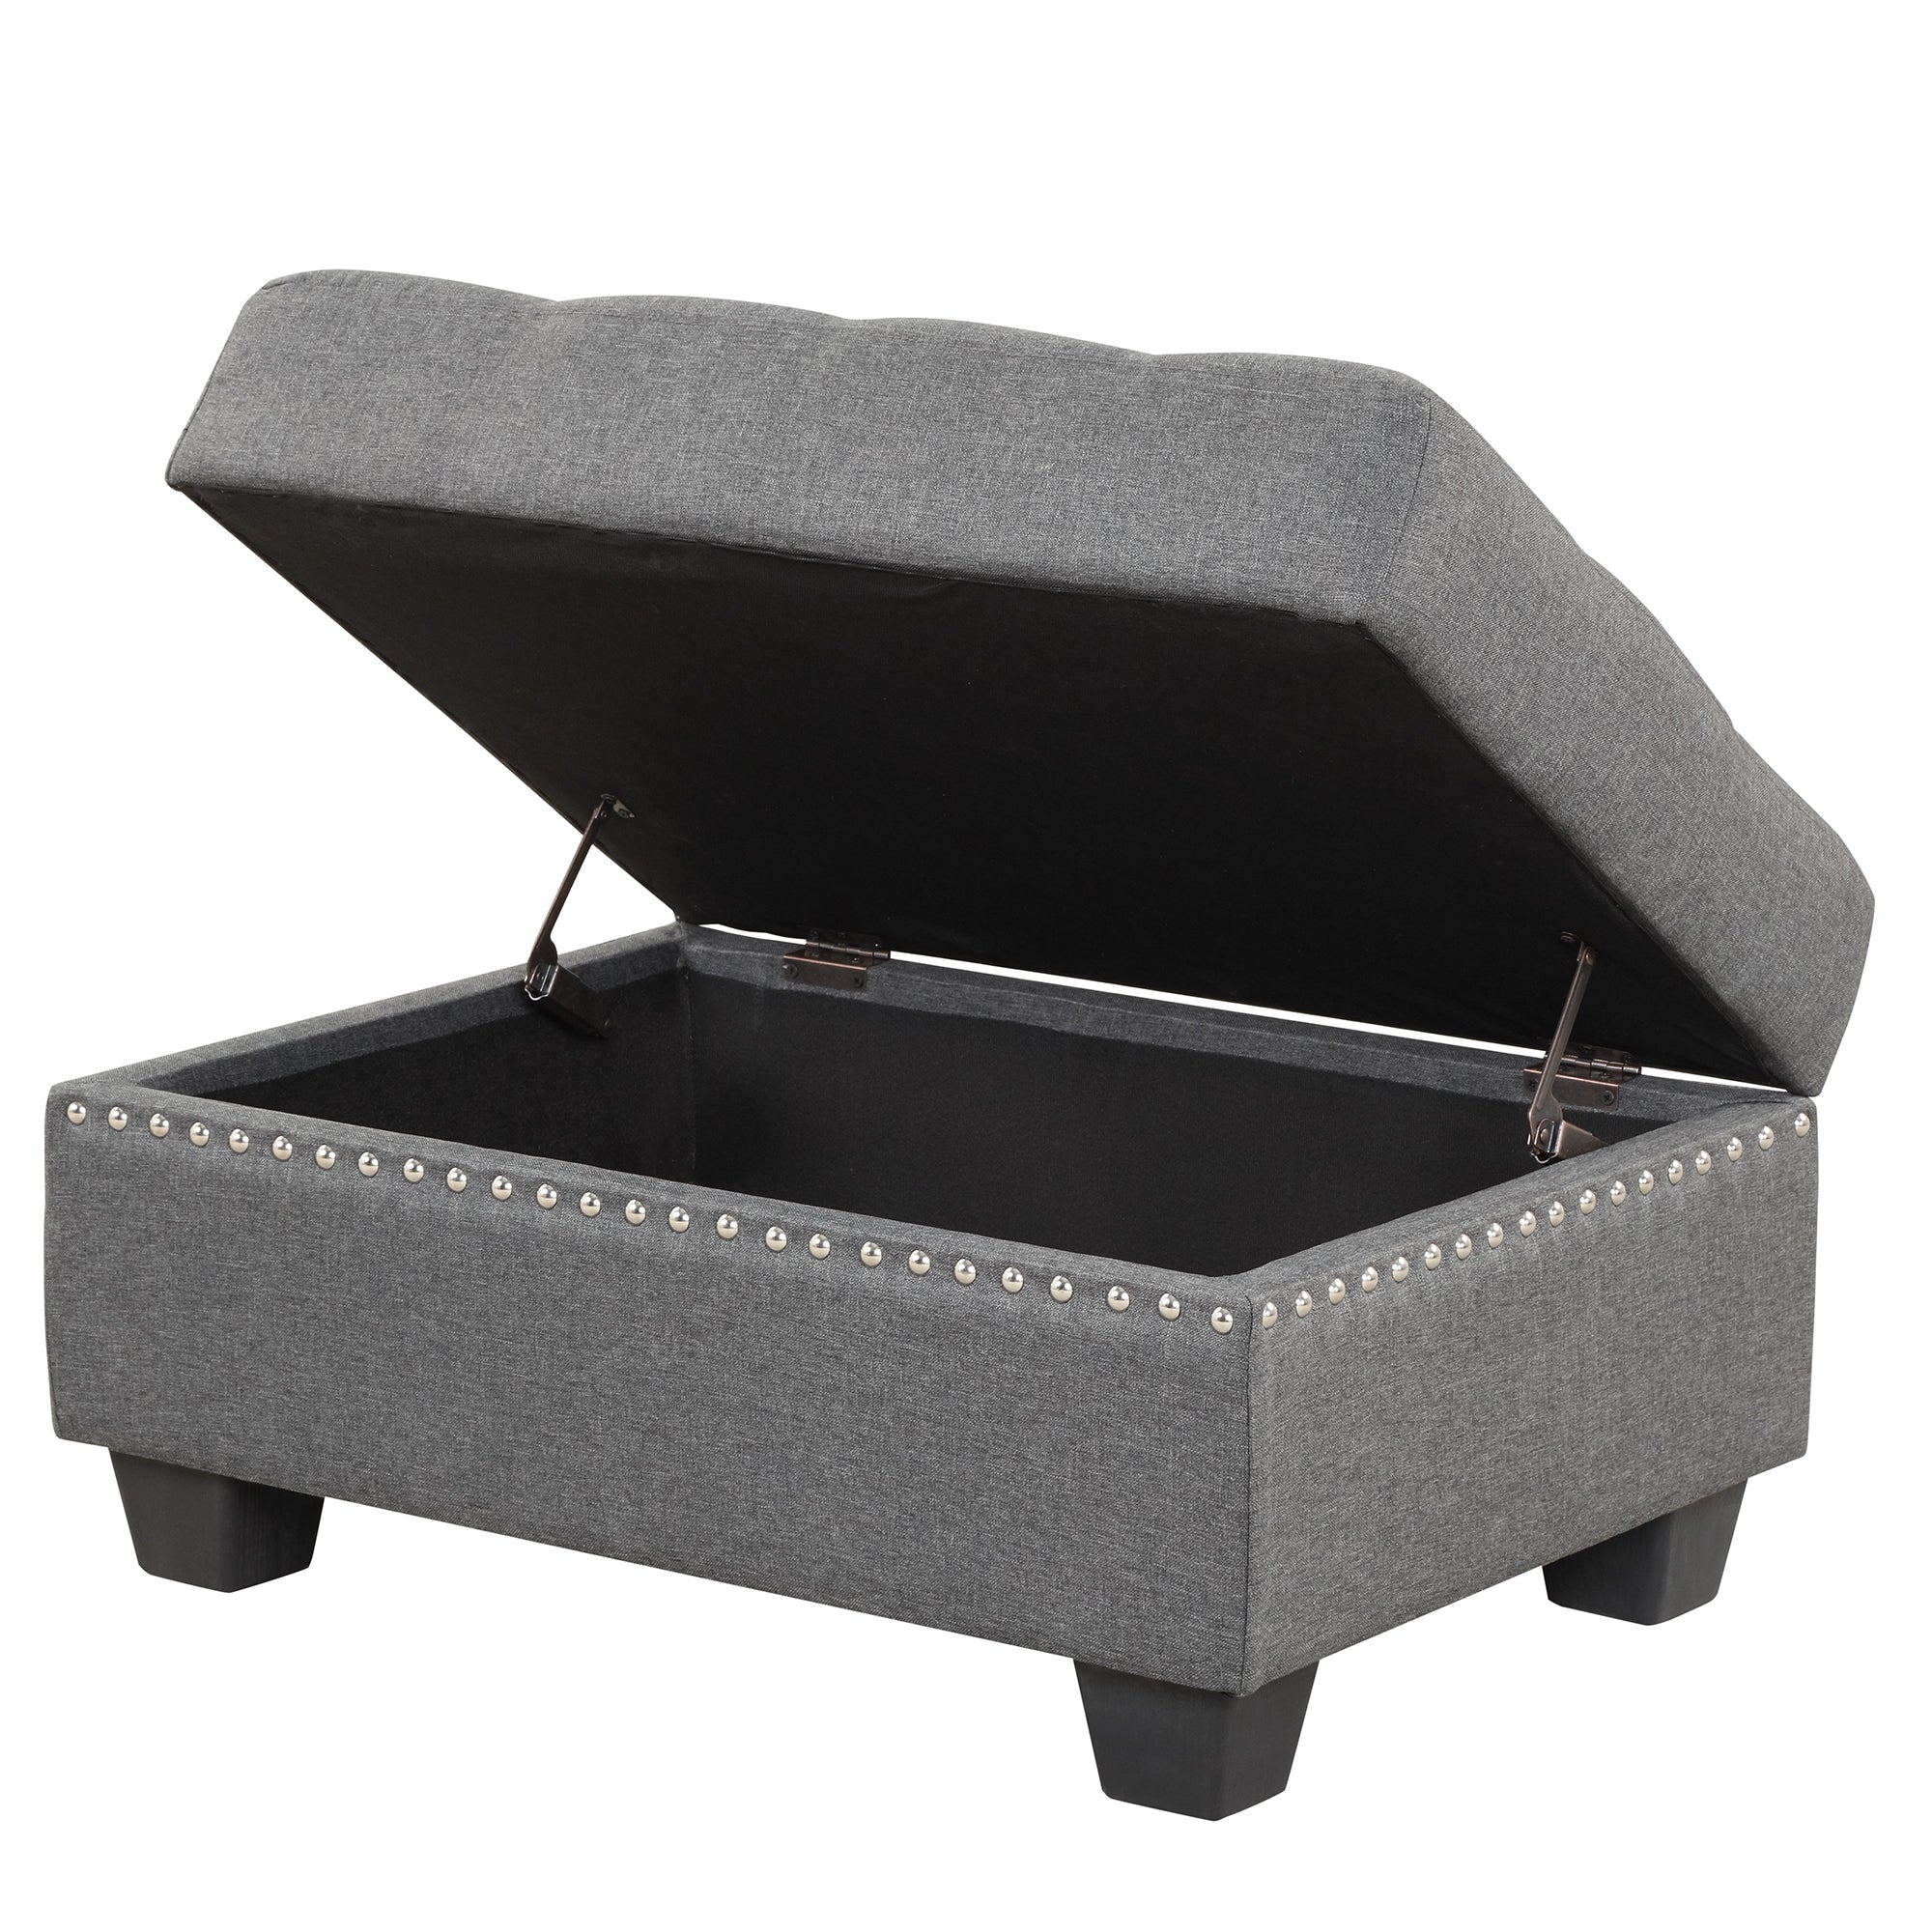 104.5" Reversible Sectional Sofa Space Saving with Storage Ottoman Rivet Ornament L-shape Couch for Small or Large Space Dorm Apartment,Gray(old SG000405AAA)